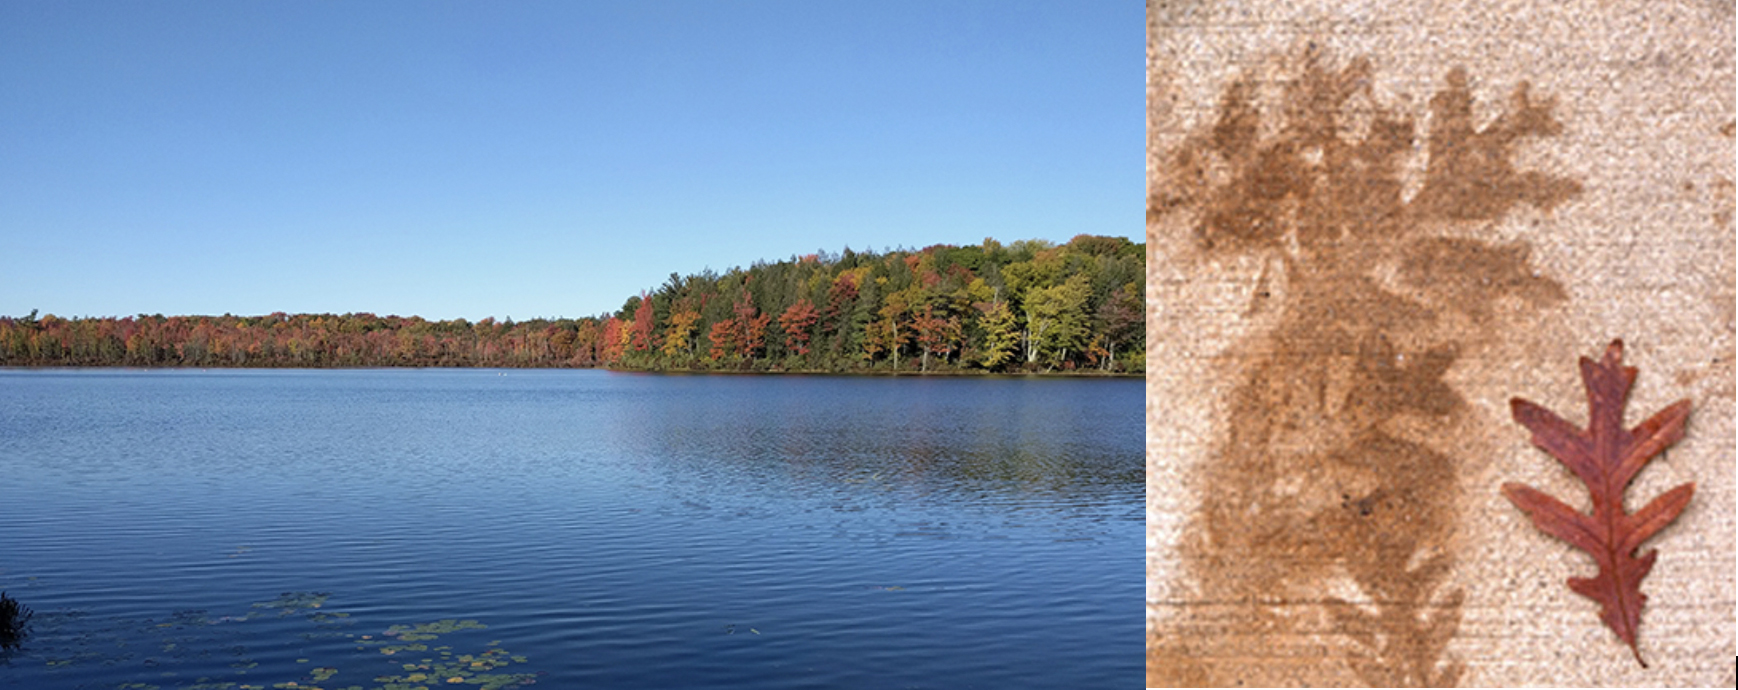 Lakes worldwide, including Lake Lacawac (above), are threatened with decreasing water clarity, due in part to increased dissolved organic matter inputs such as from decomposing oak leaves (above). 